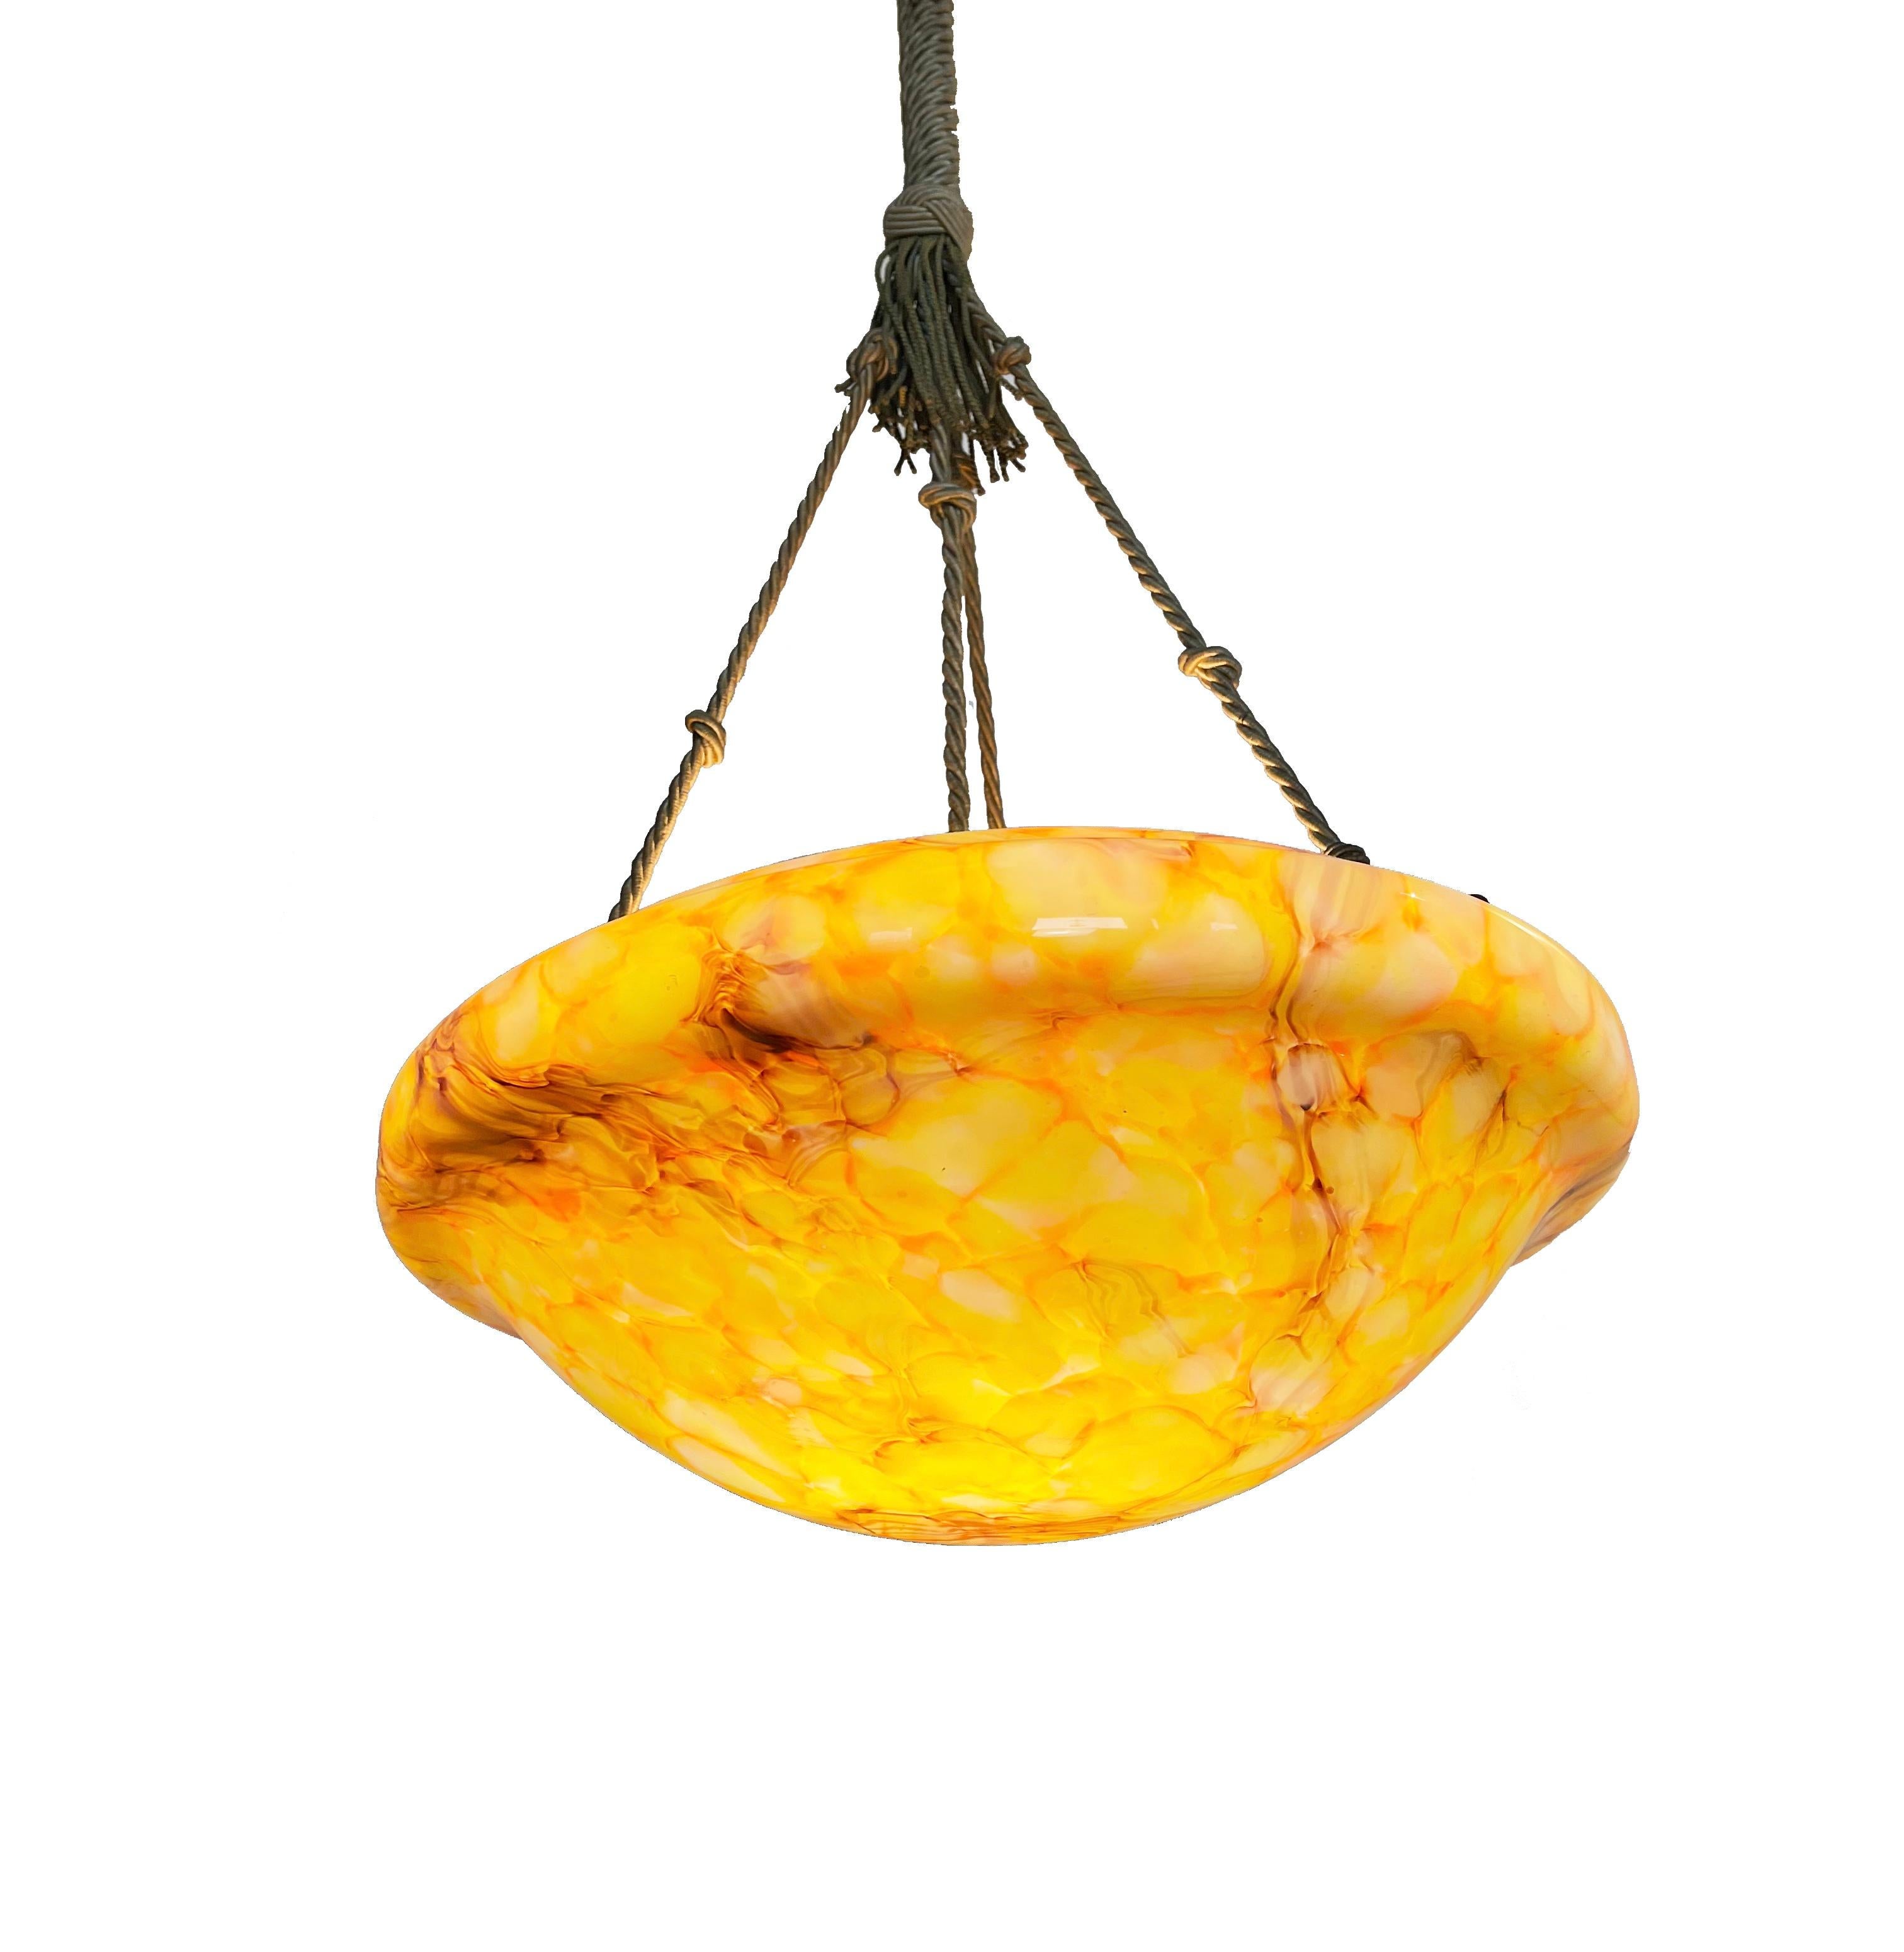 Hand-Woven Art Deco Marbled Glass Ceiling Lamp, Orange Alabaster Style, 1940s, Germany For Sale